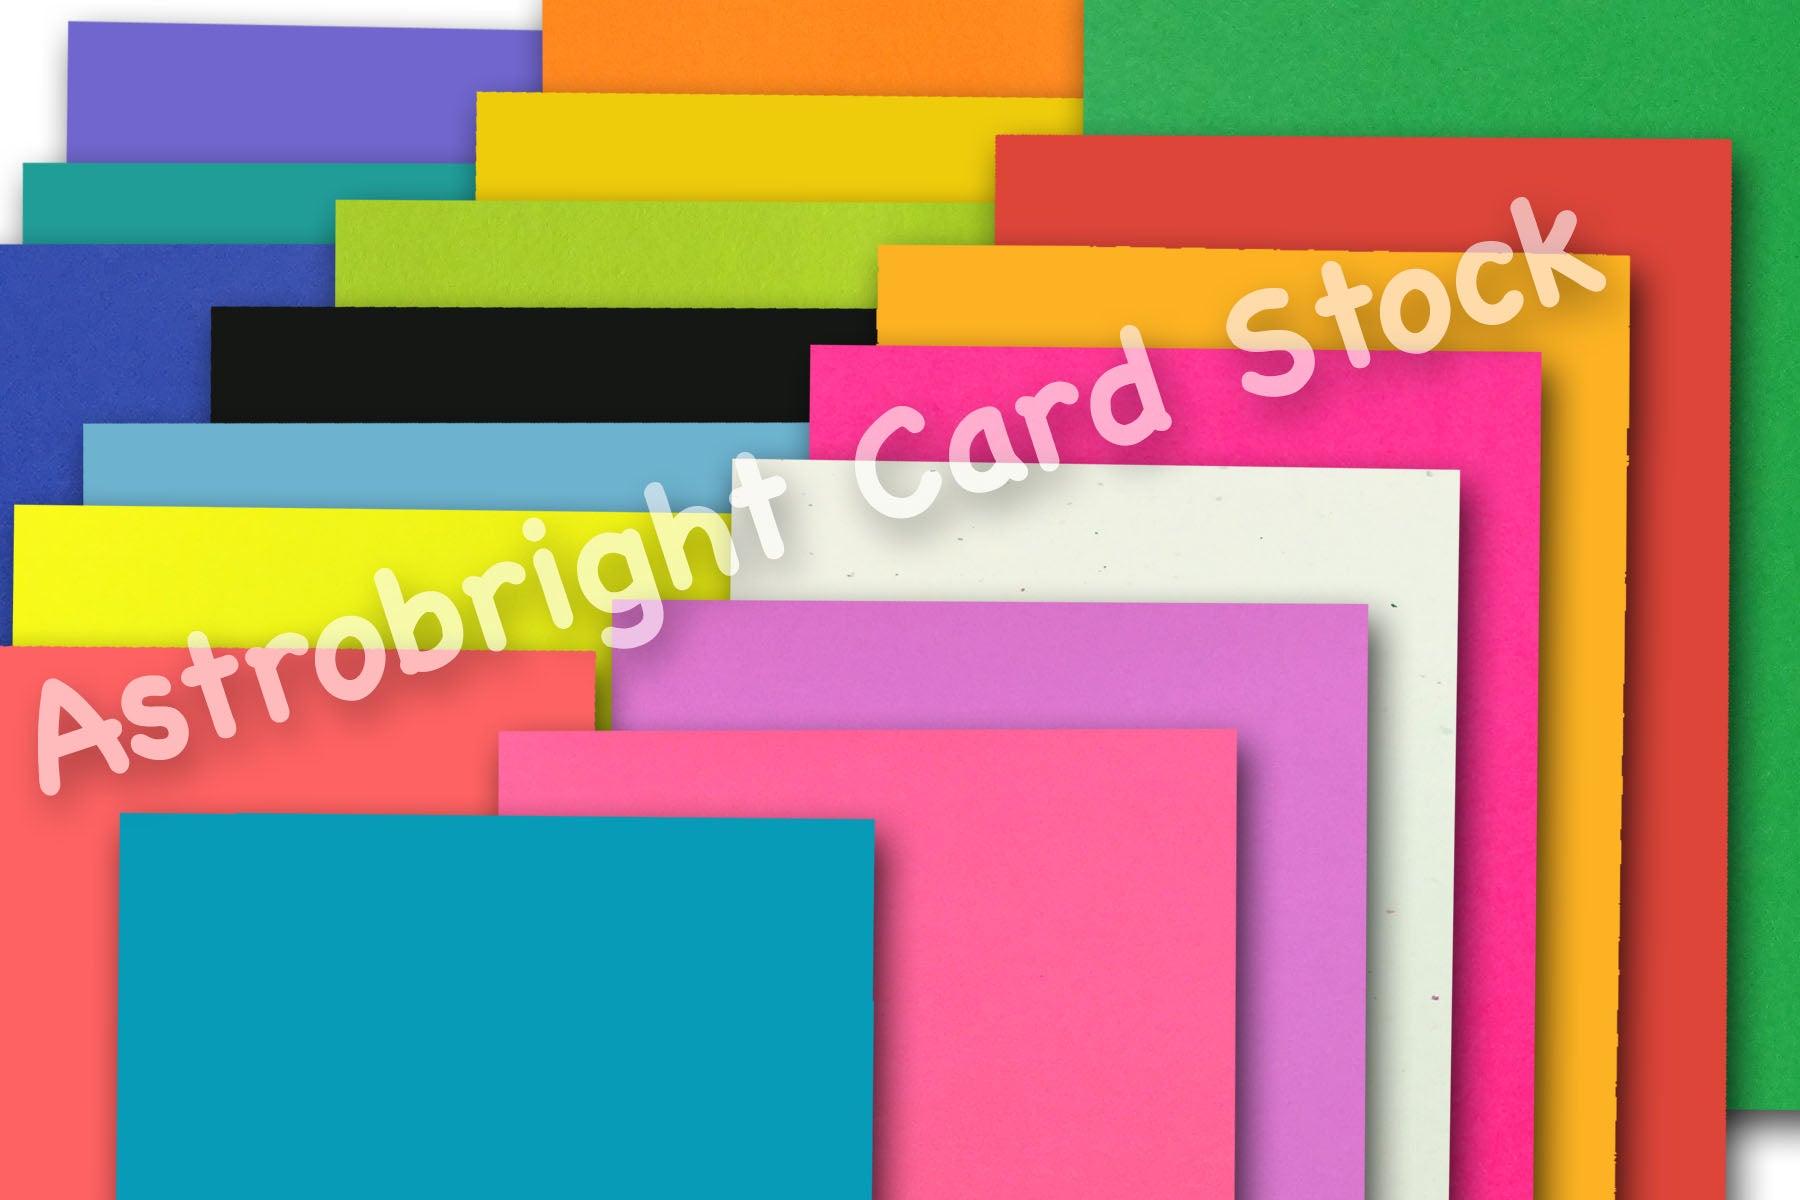 Astrobright PAPER for flyers, color copies, and mailings